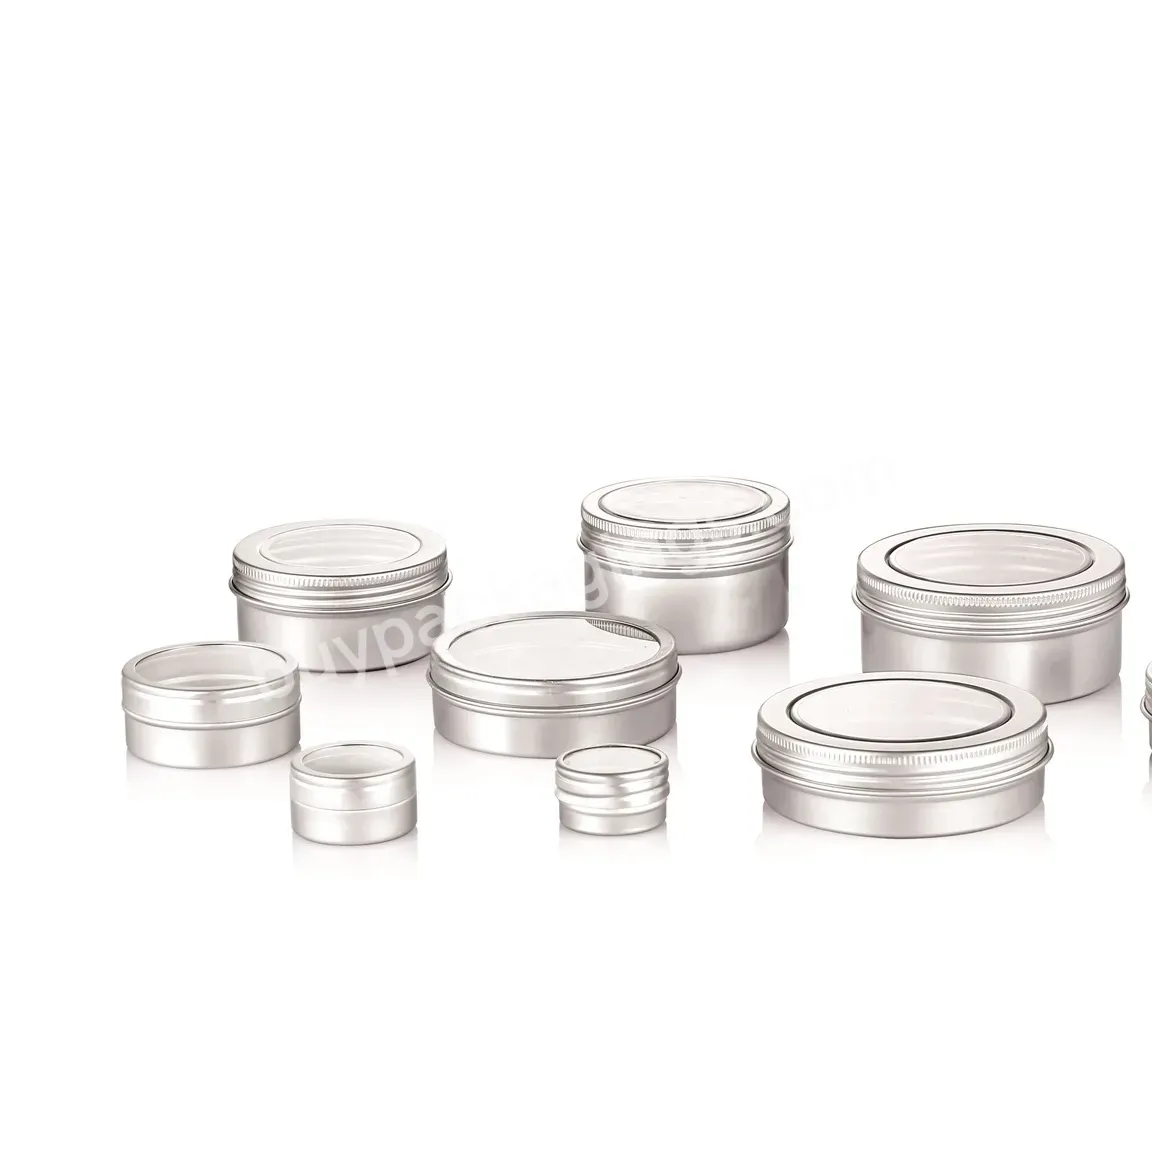 Oem 5g-500g Empty Cosmetic Silver Aluminum Container Jars With Clear Pvc Window